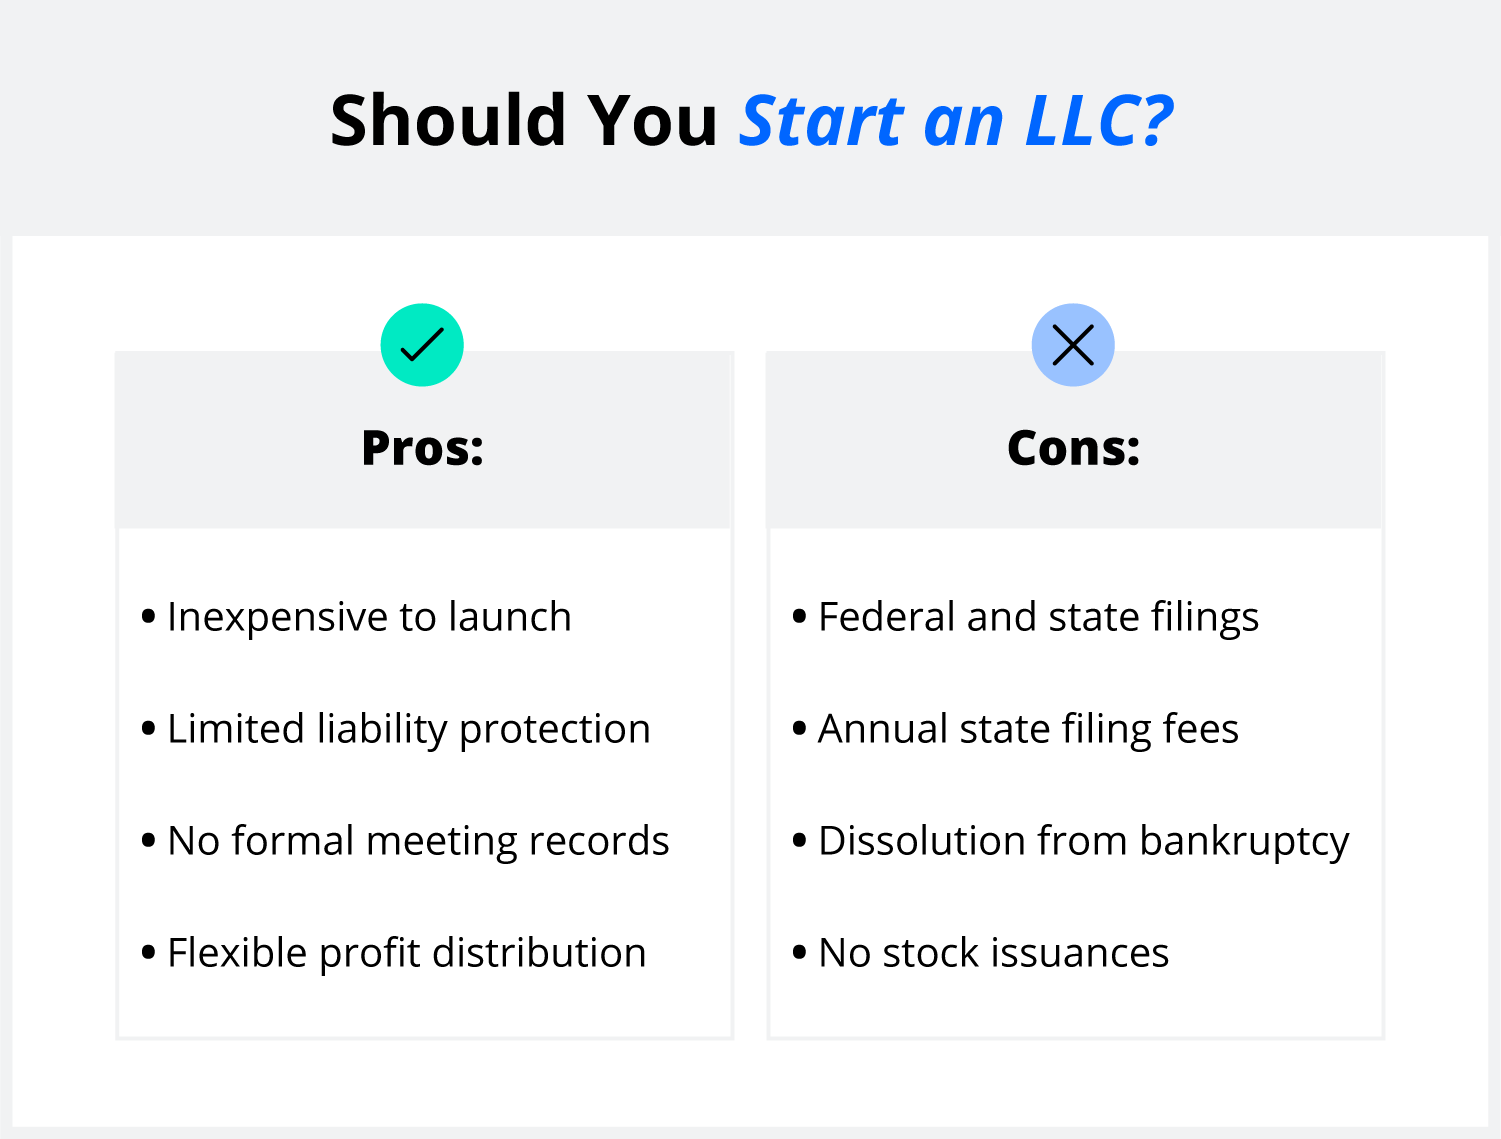 A table showing pros and cons of starting an llc